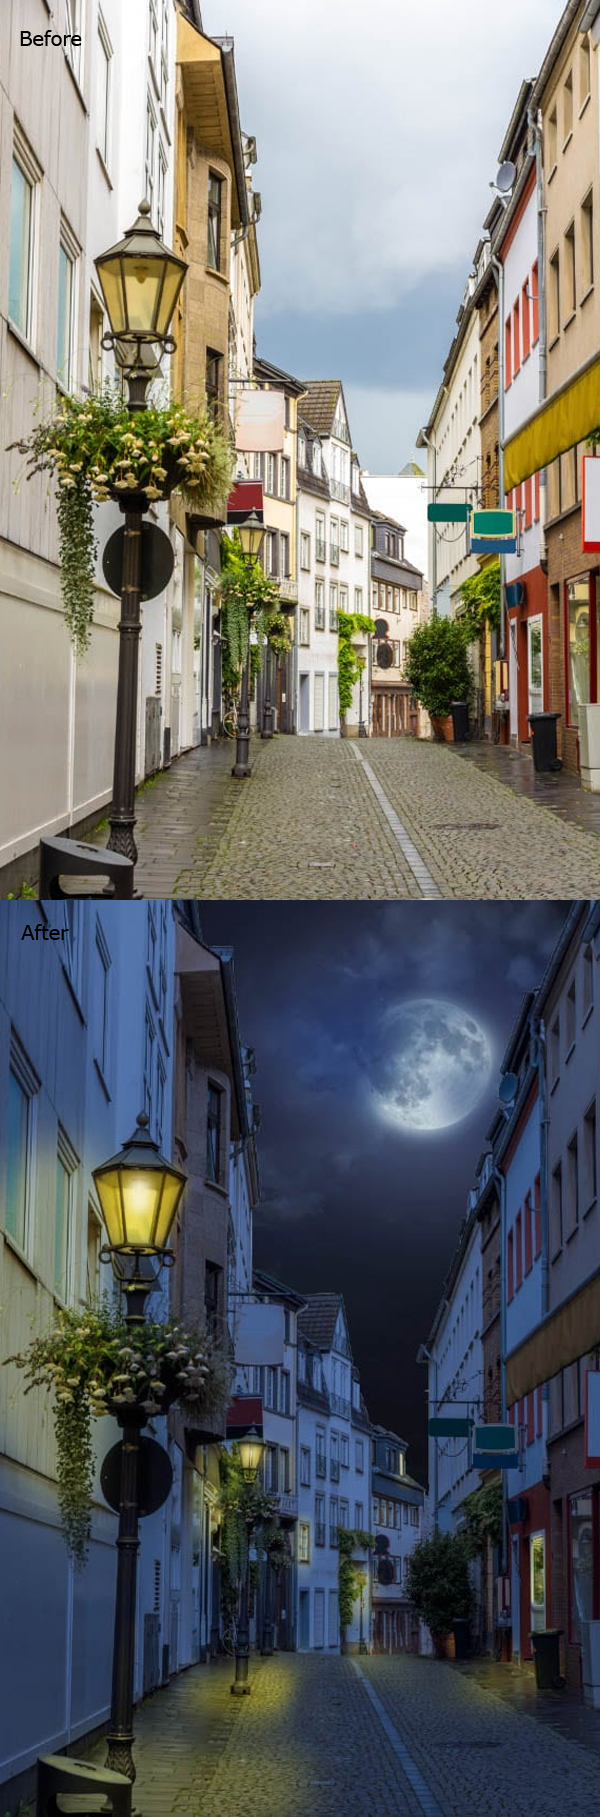 How to Turn Day into Night in this Photoshop Tutorial